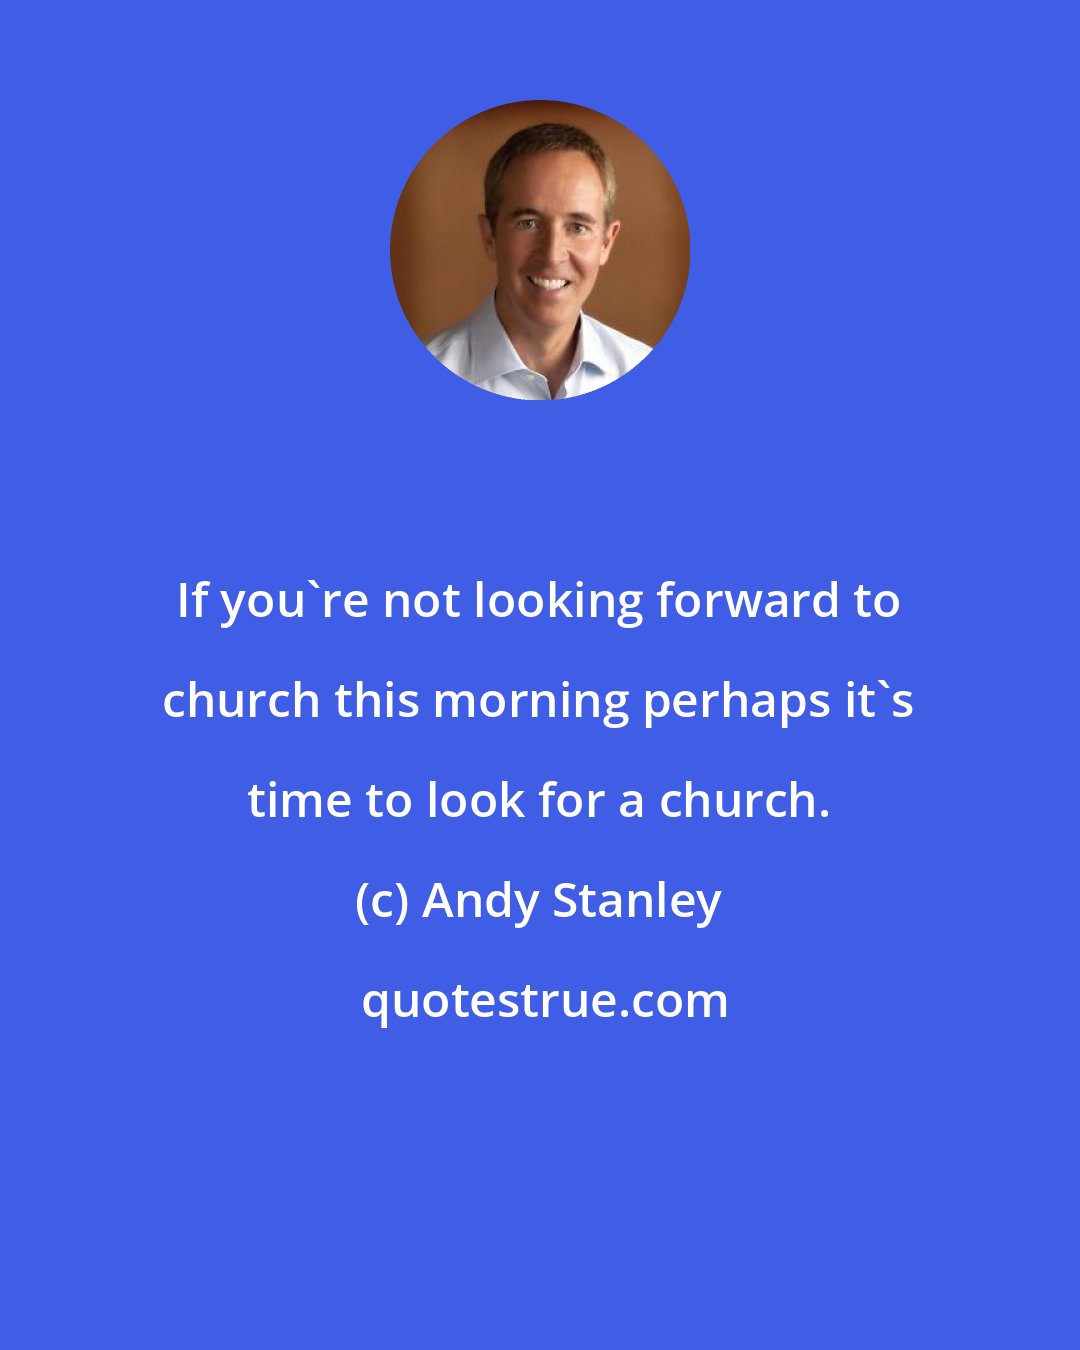 Andy Stanley: If you're not looking forward to church this morning perhaps it's time to look for a church.